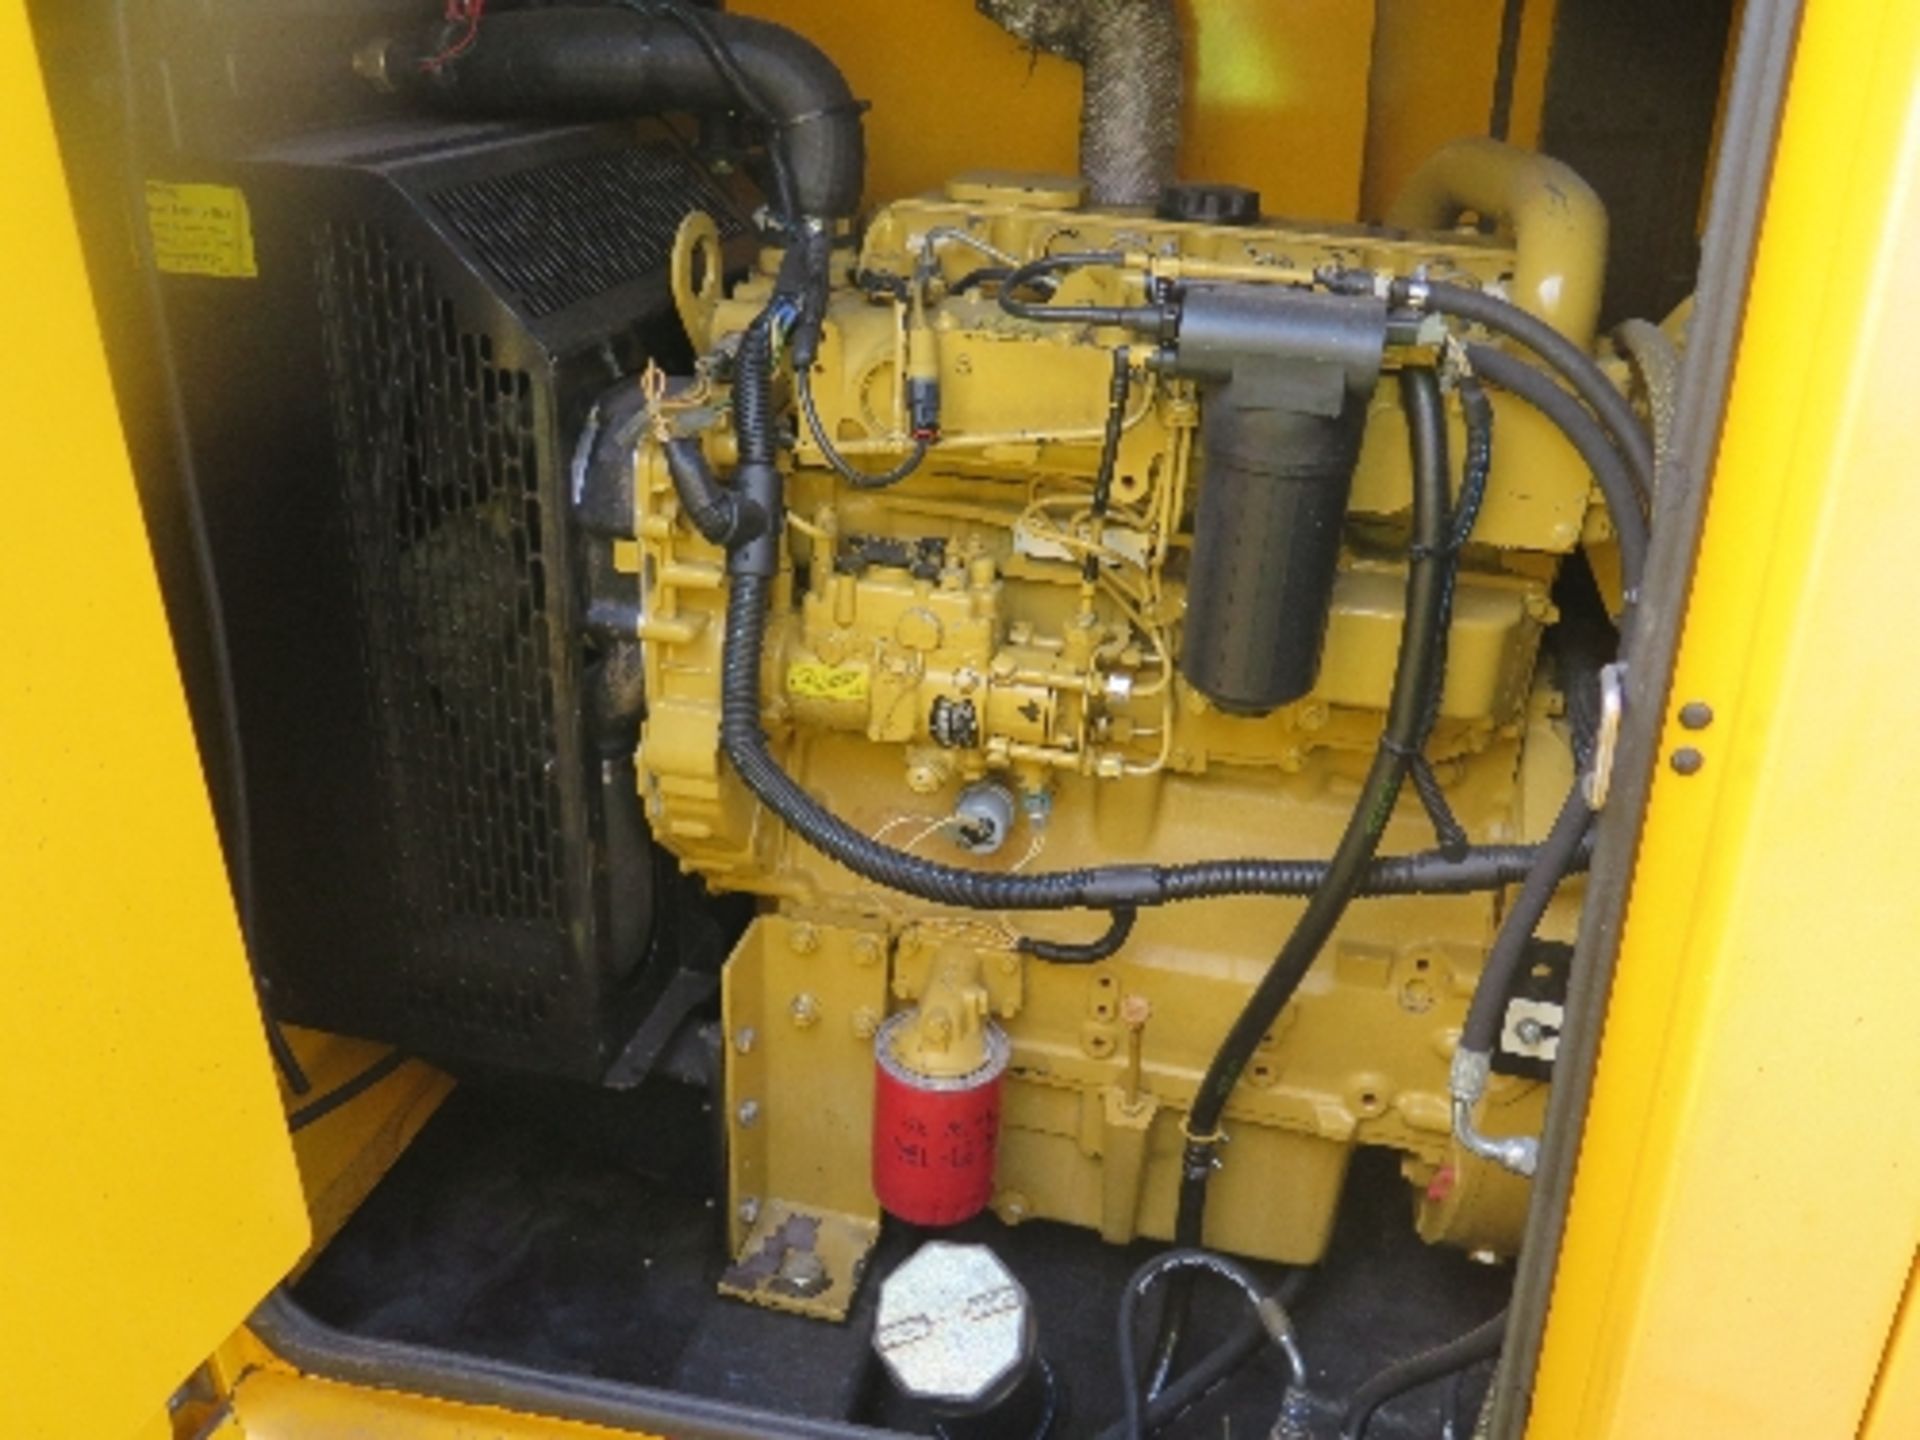 Caterpillar XQE80 generator 14819 hrs 157811
PERKINS - RUNS AND MAKES POWER
ALL LOTS are SOLD AS - Image 3 of 6